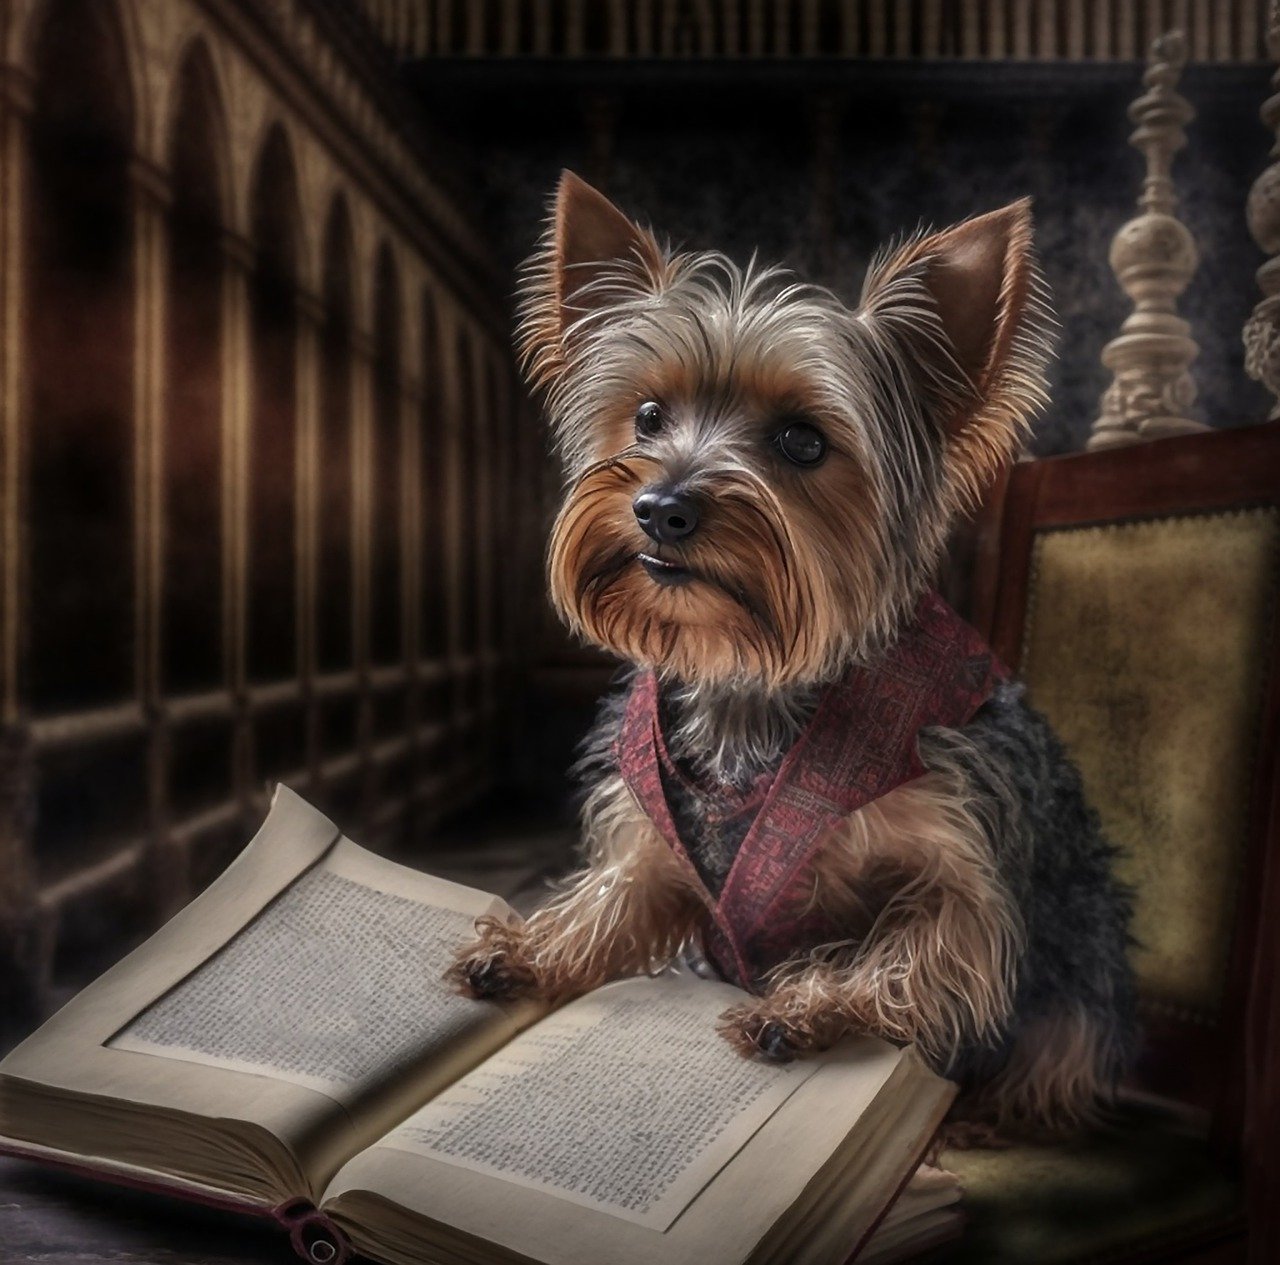 chien-bibliotheque-mention-legale